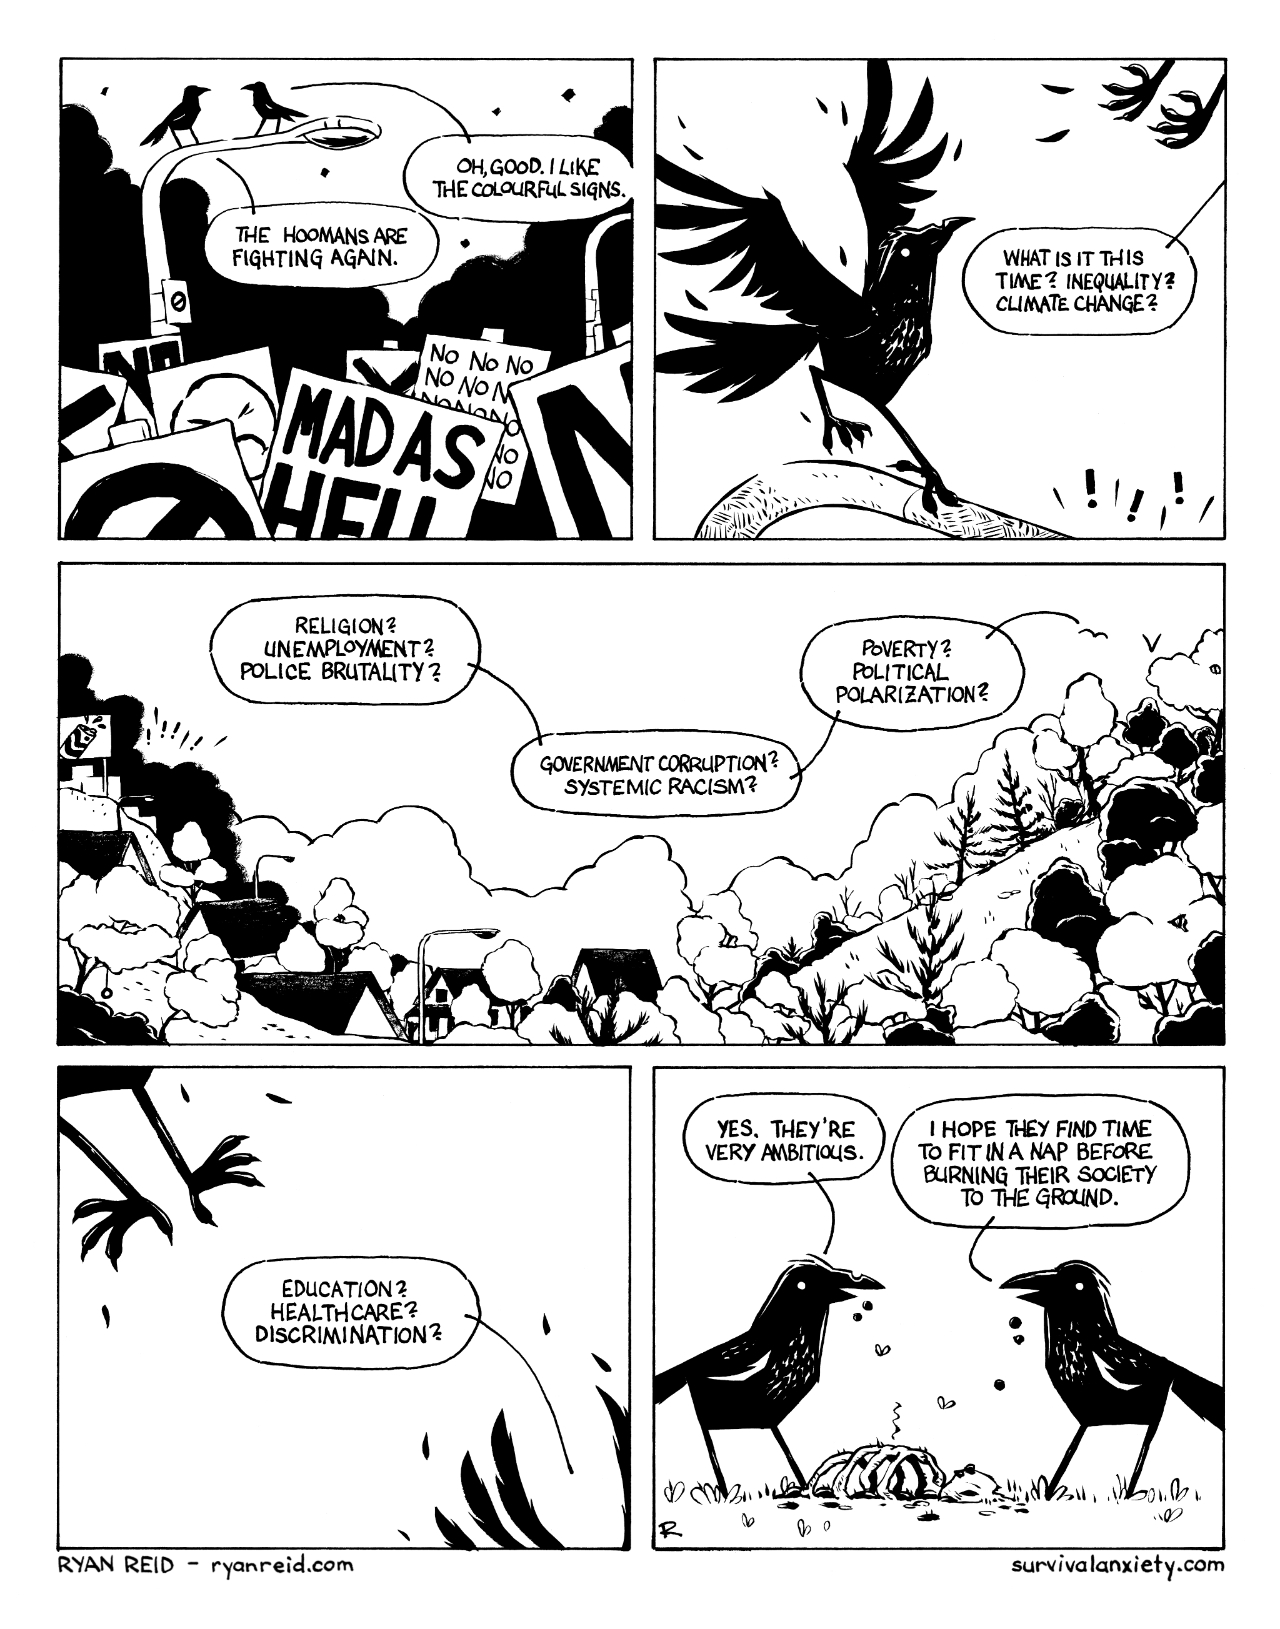 In this comic, the crows have opinions of little importance on our apparently imminent self-destruction.